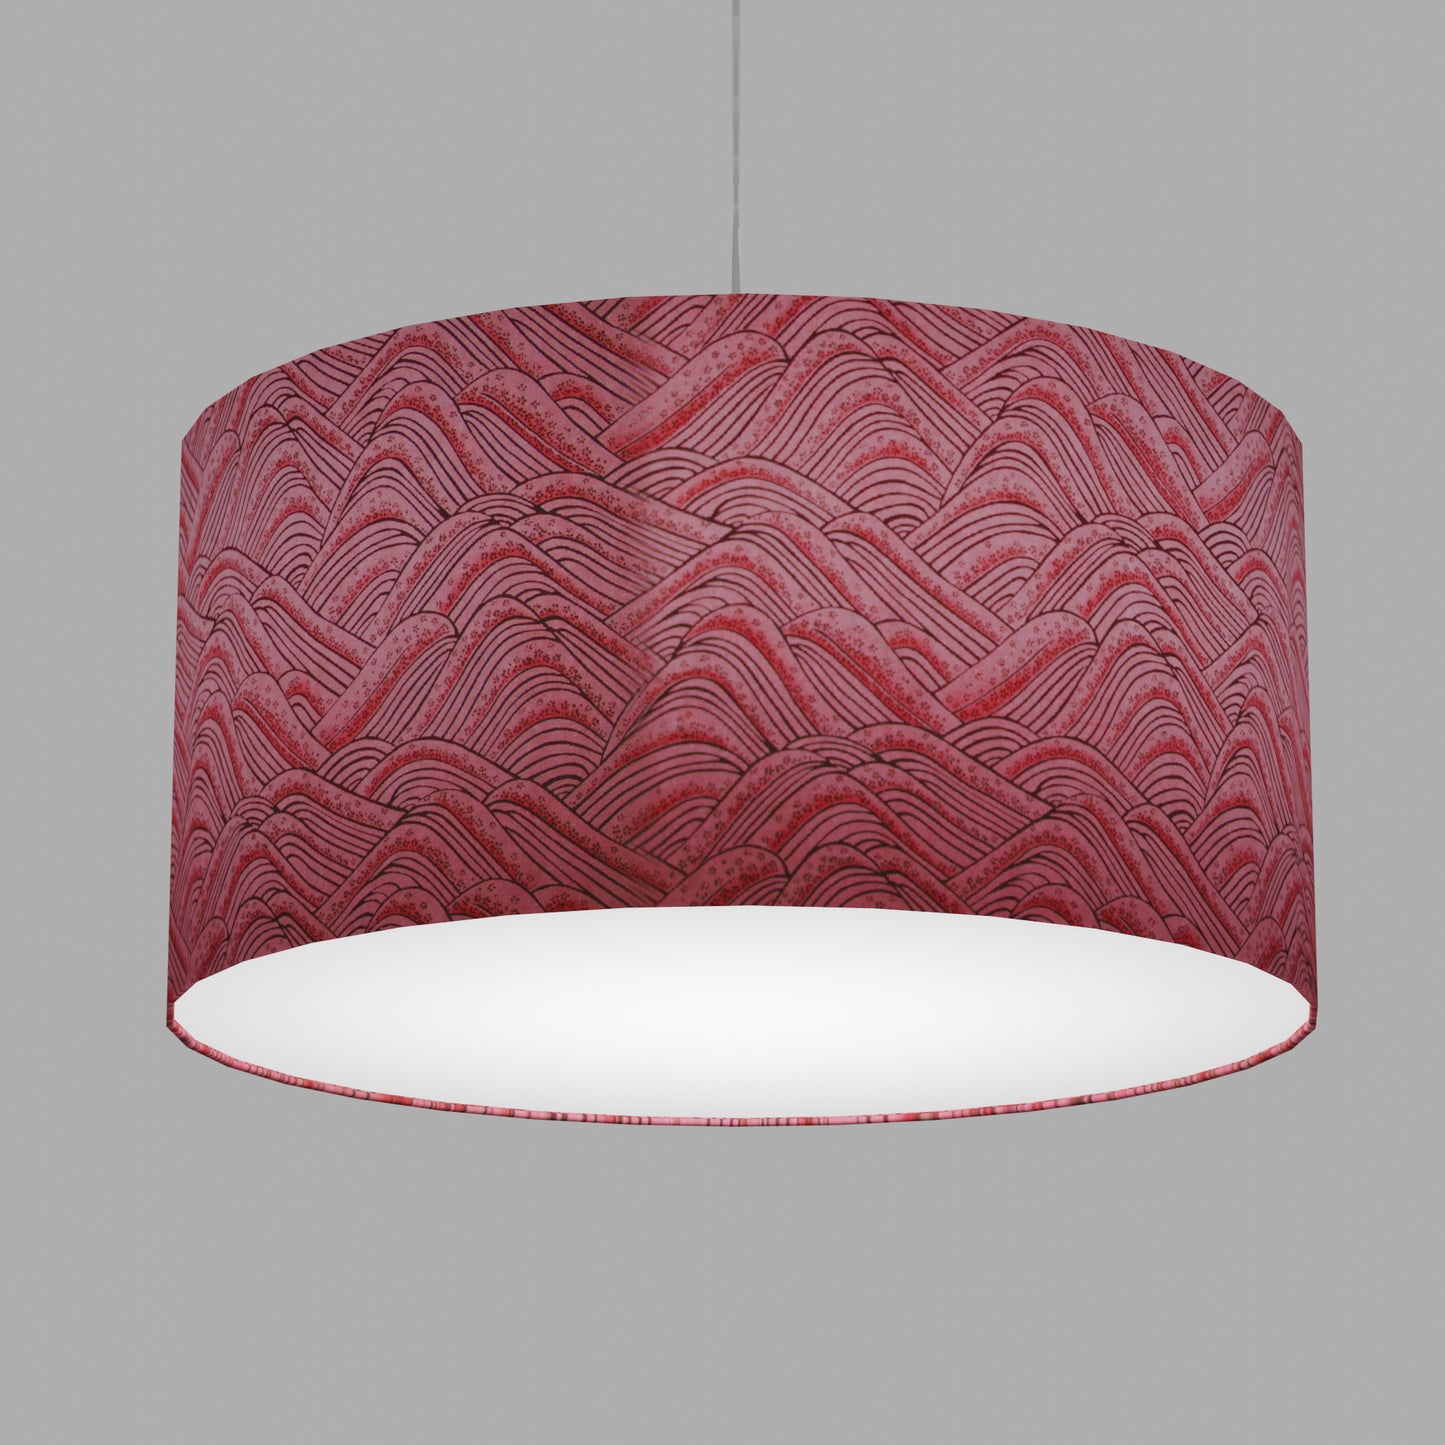 Drum Lamp Shade - W04 ~ Pink Hills with Gold Flowers, 60cm(d) x 30cm(h)